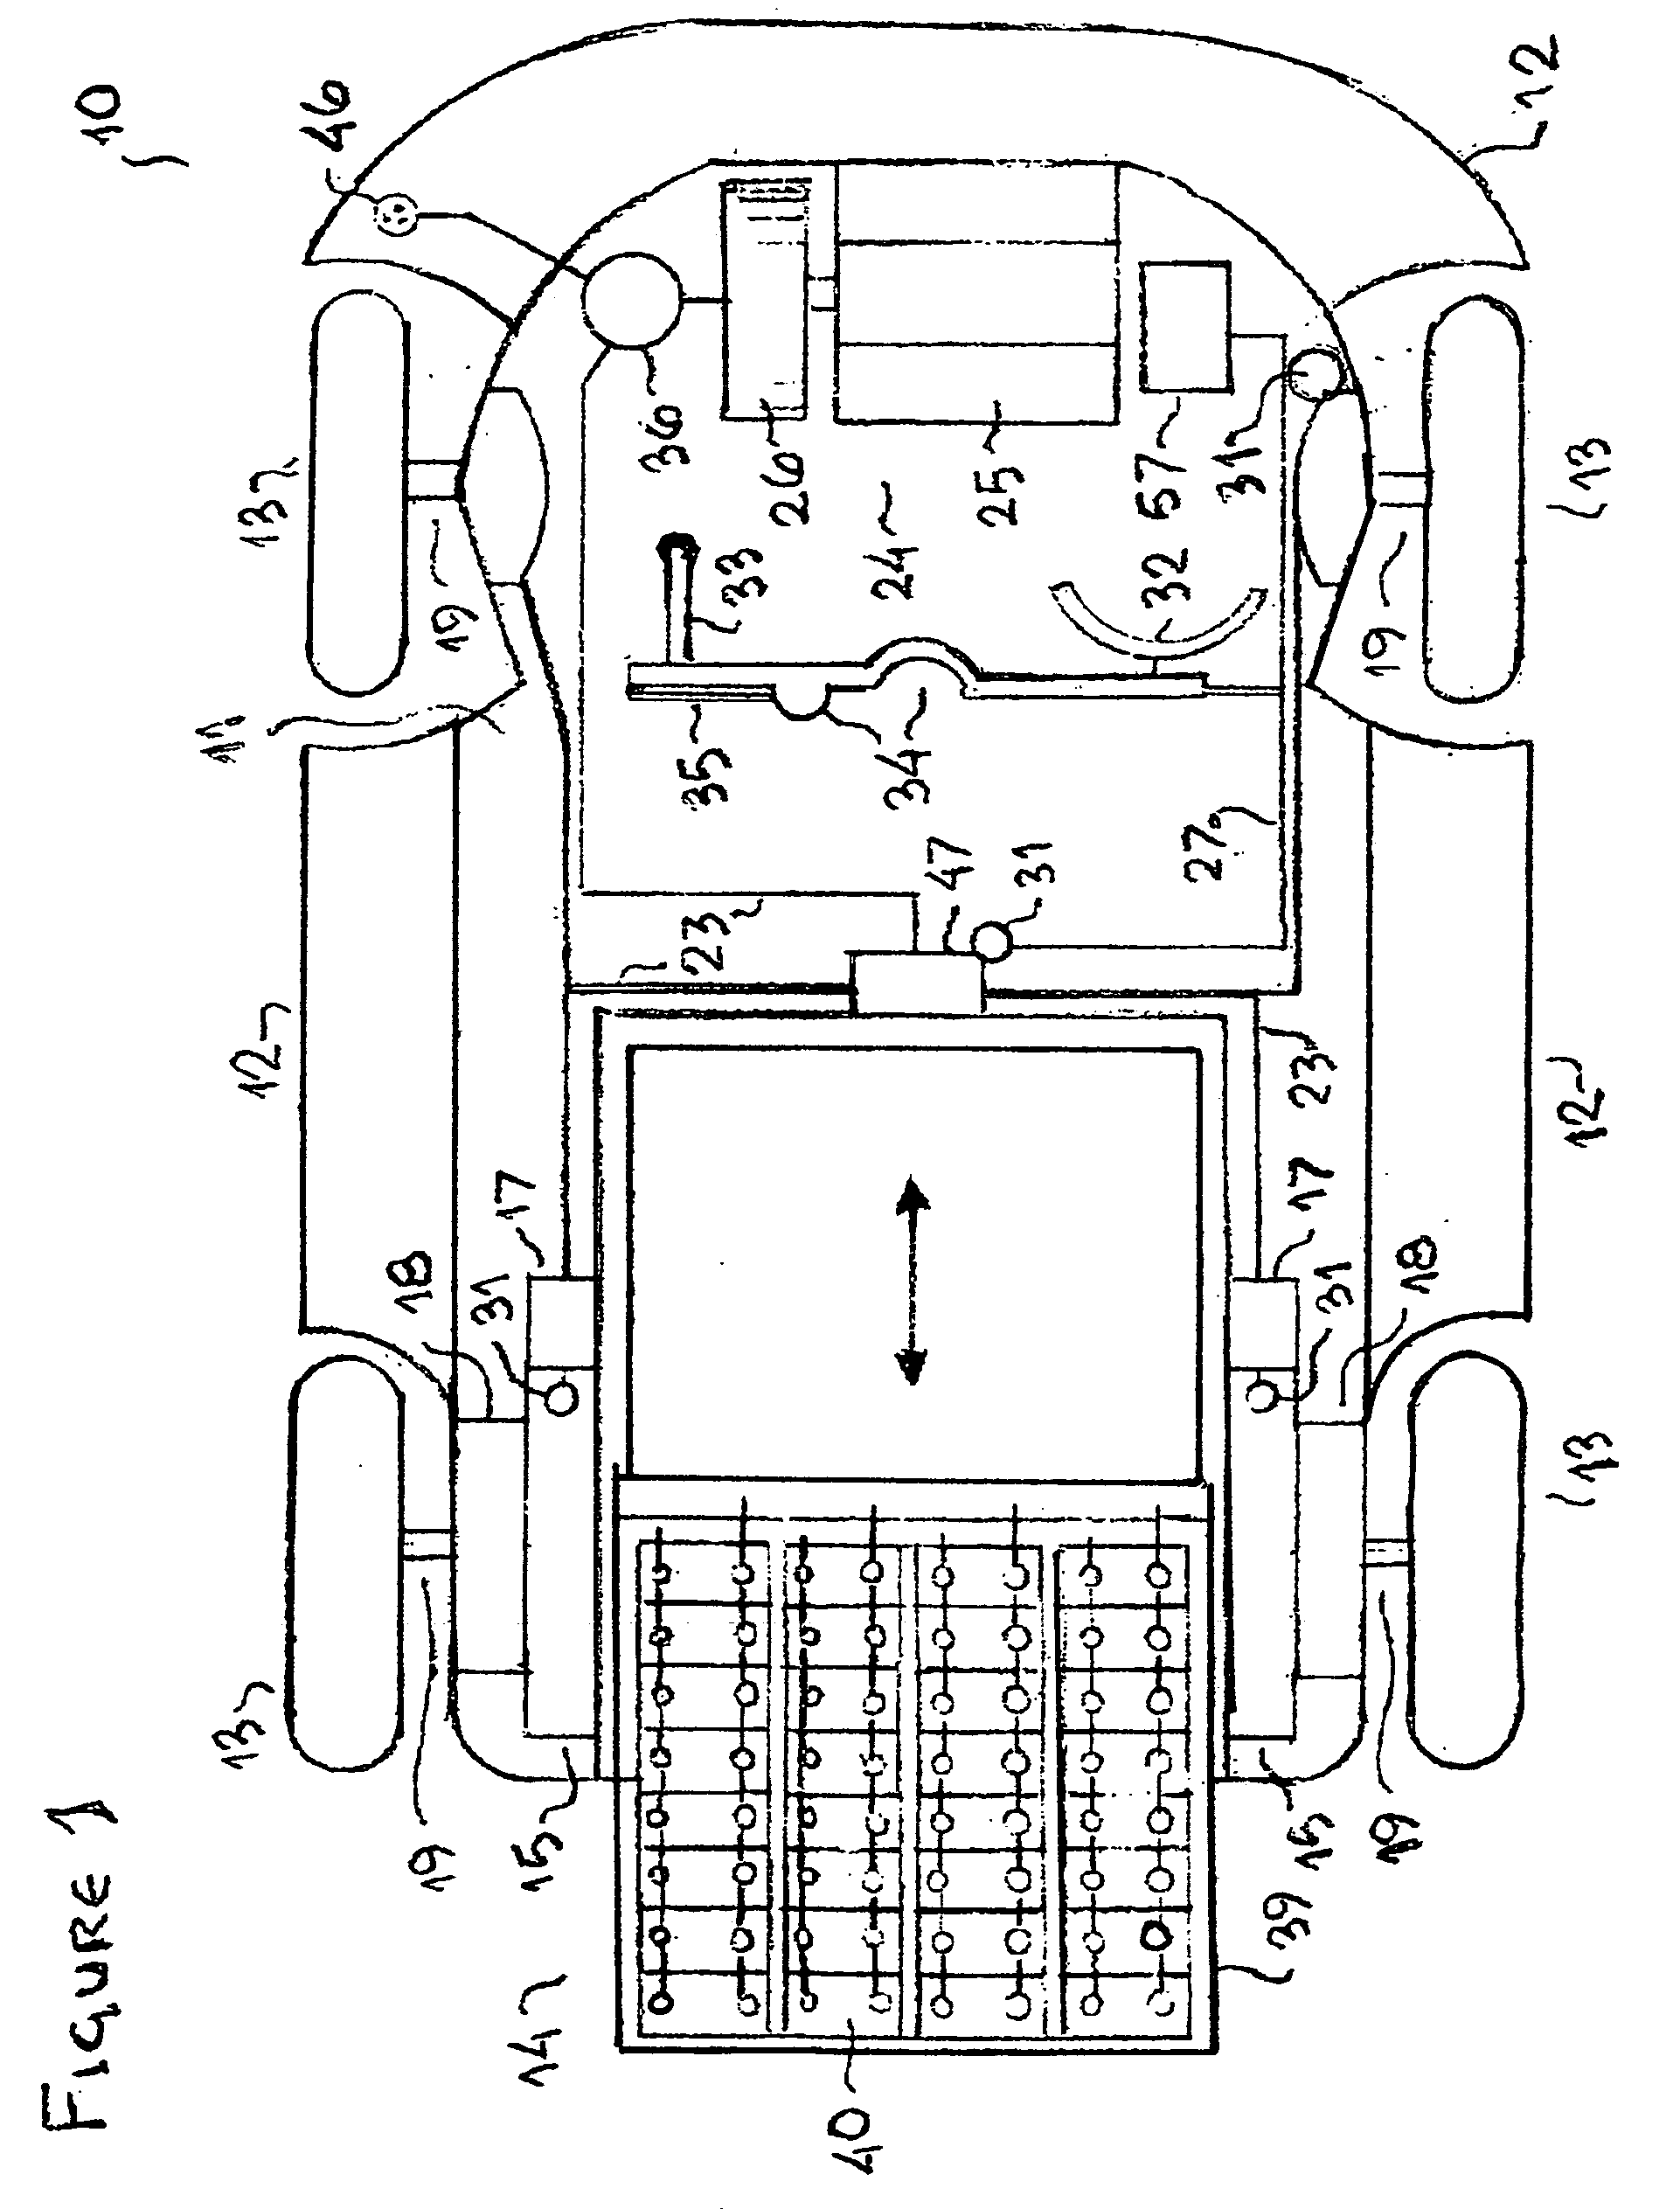 Direct current drive land vehicle